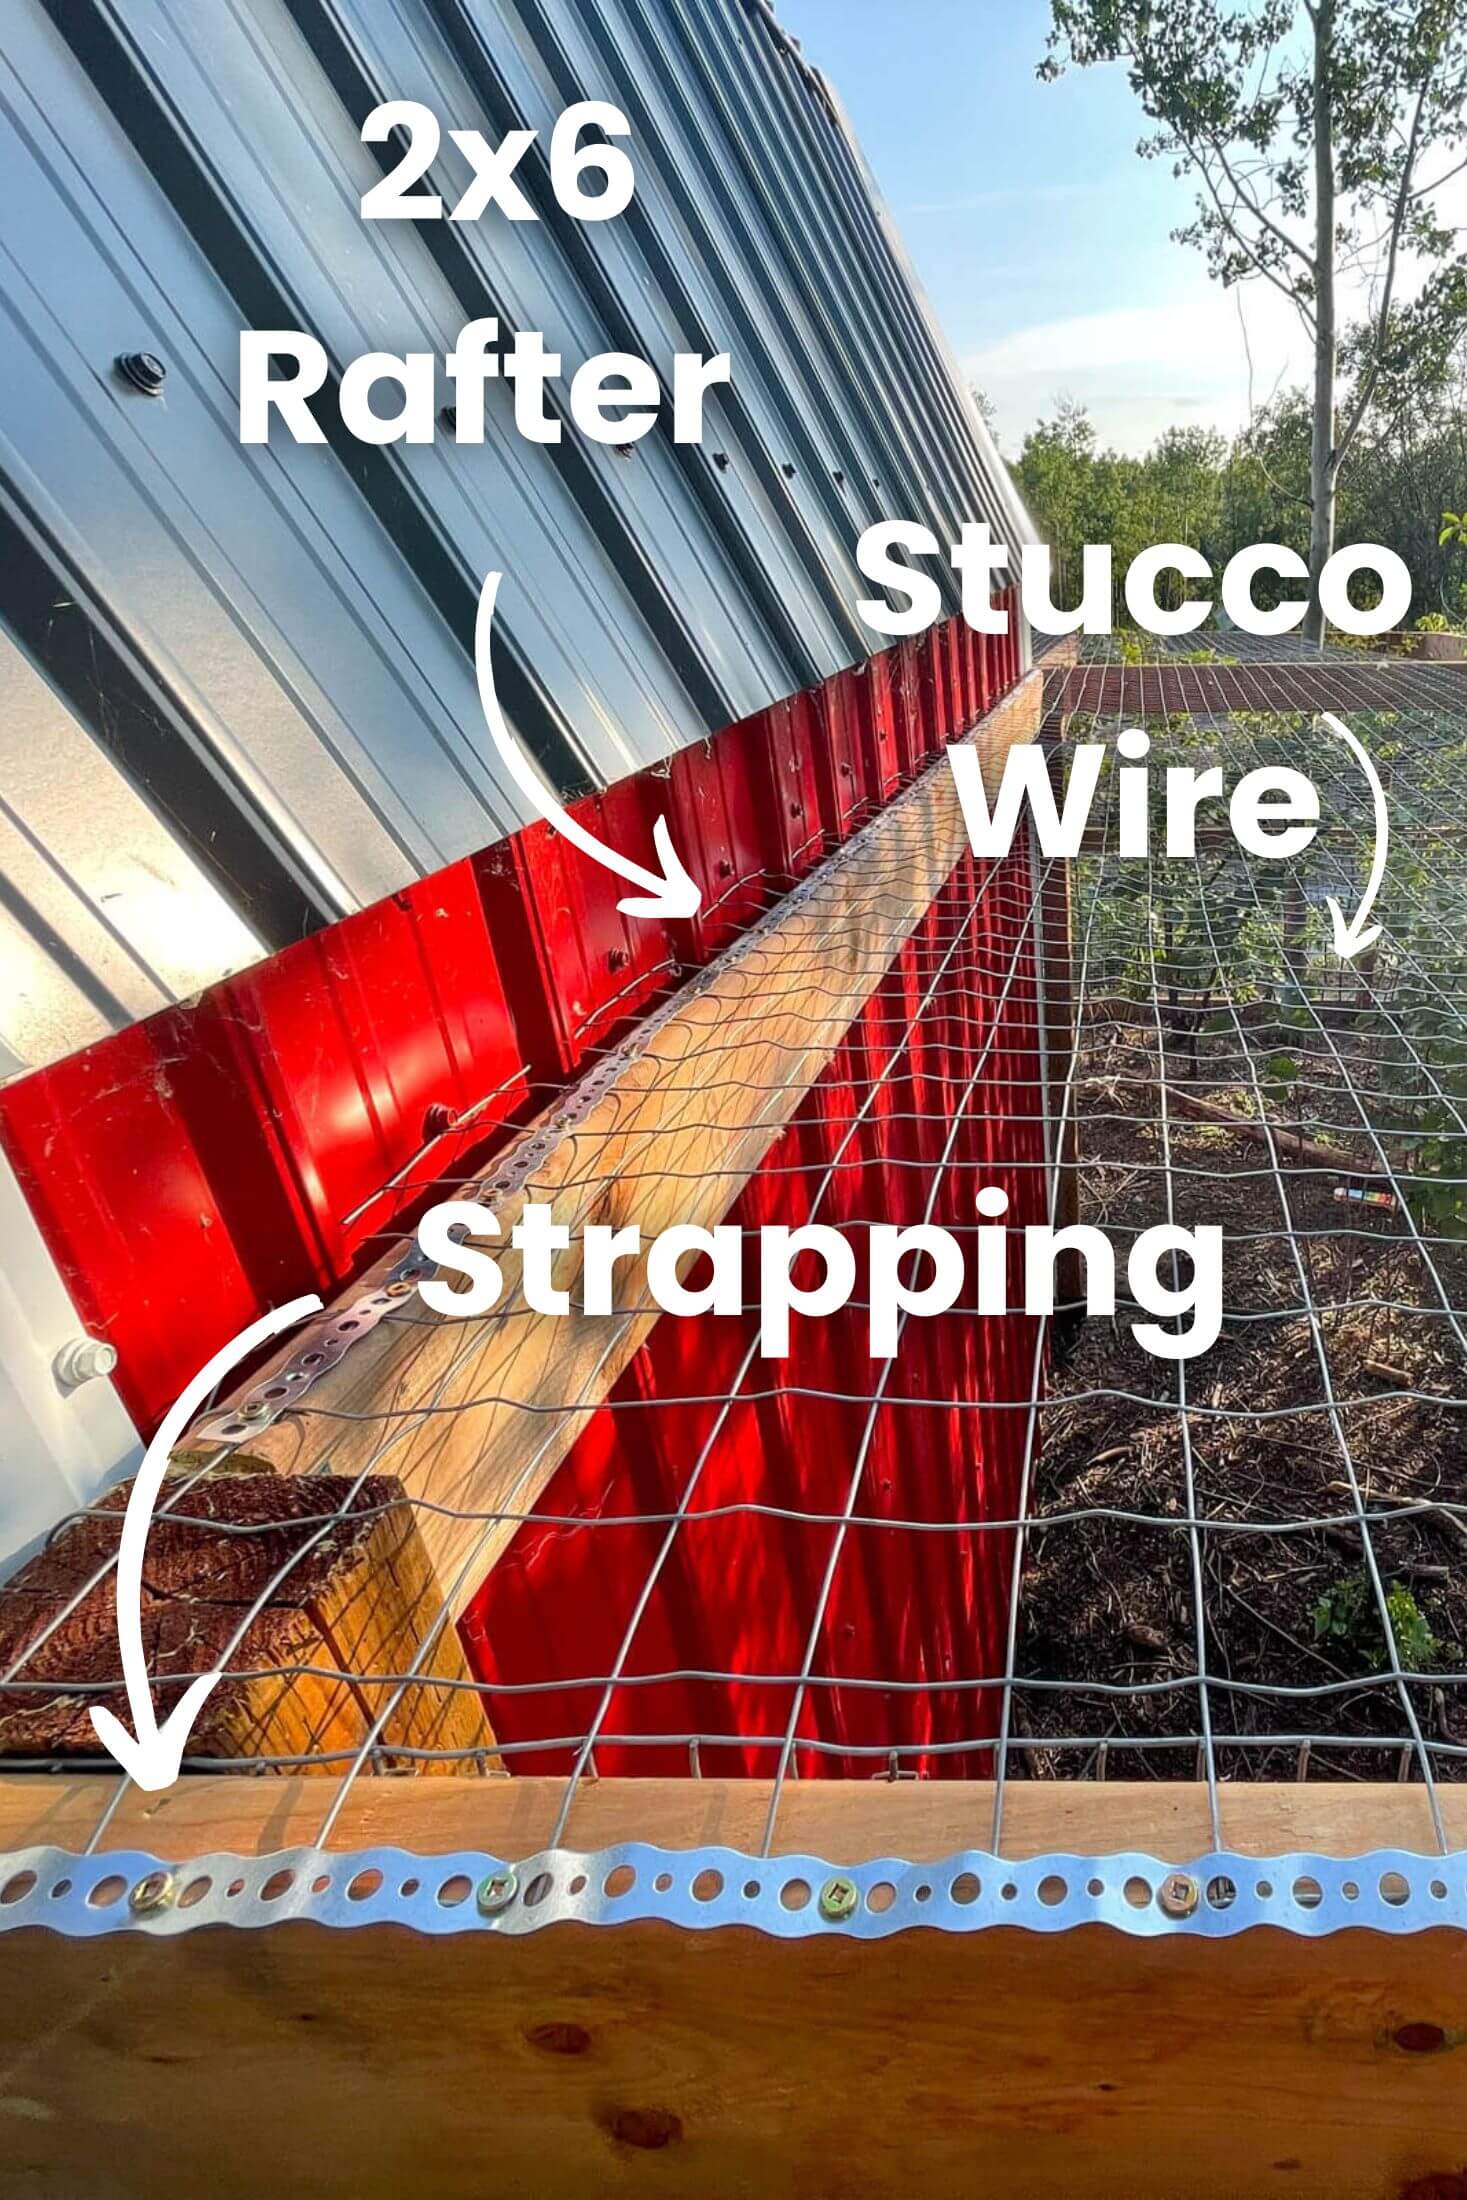 Stucco wire and strapping on top of the chicken run.